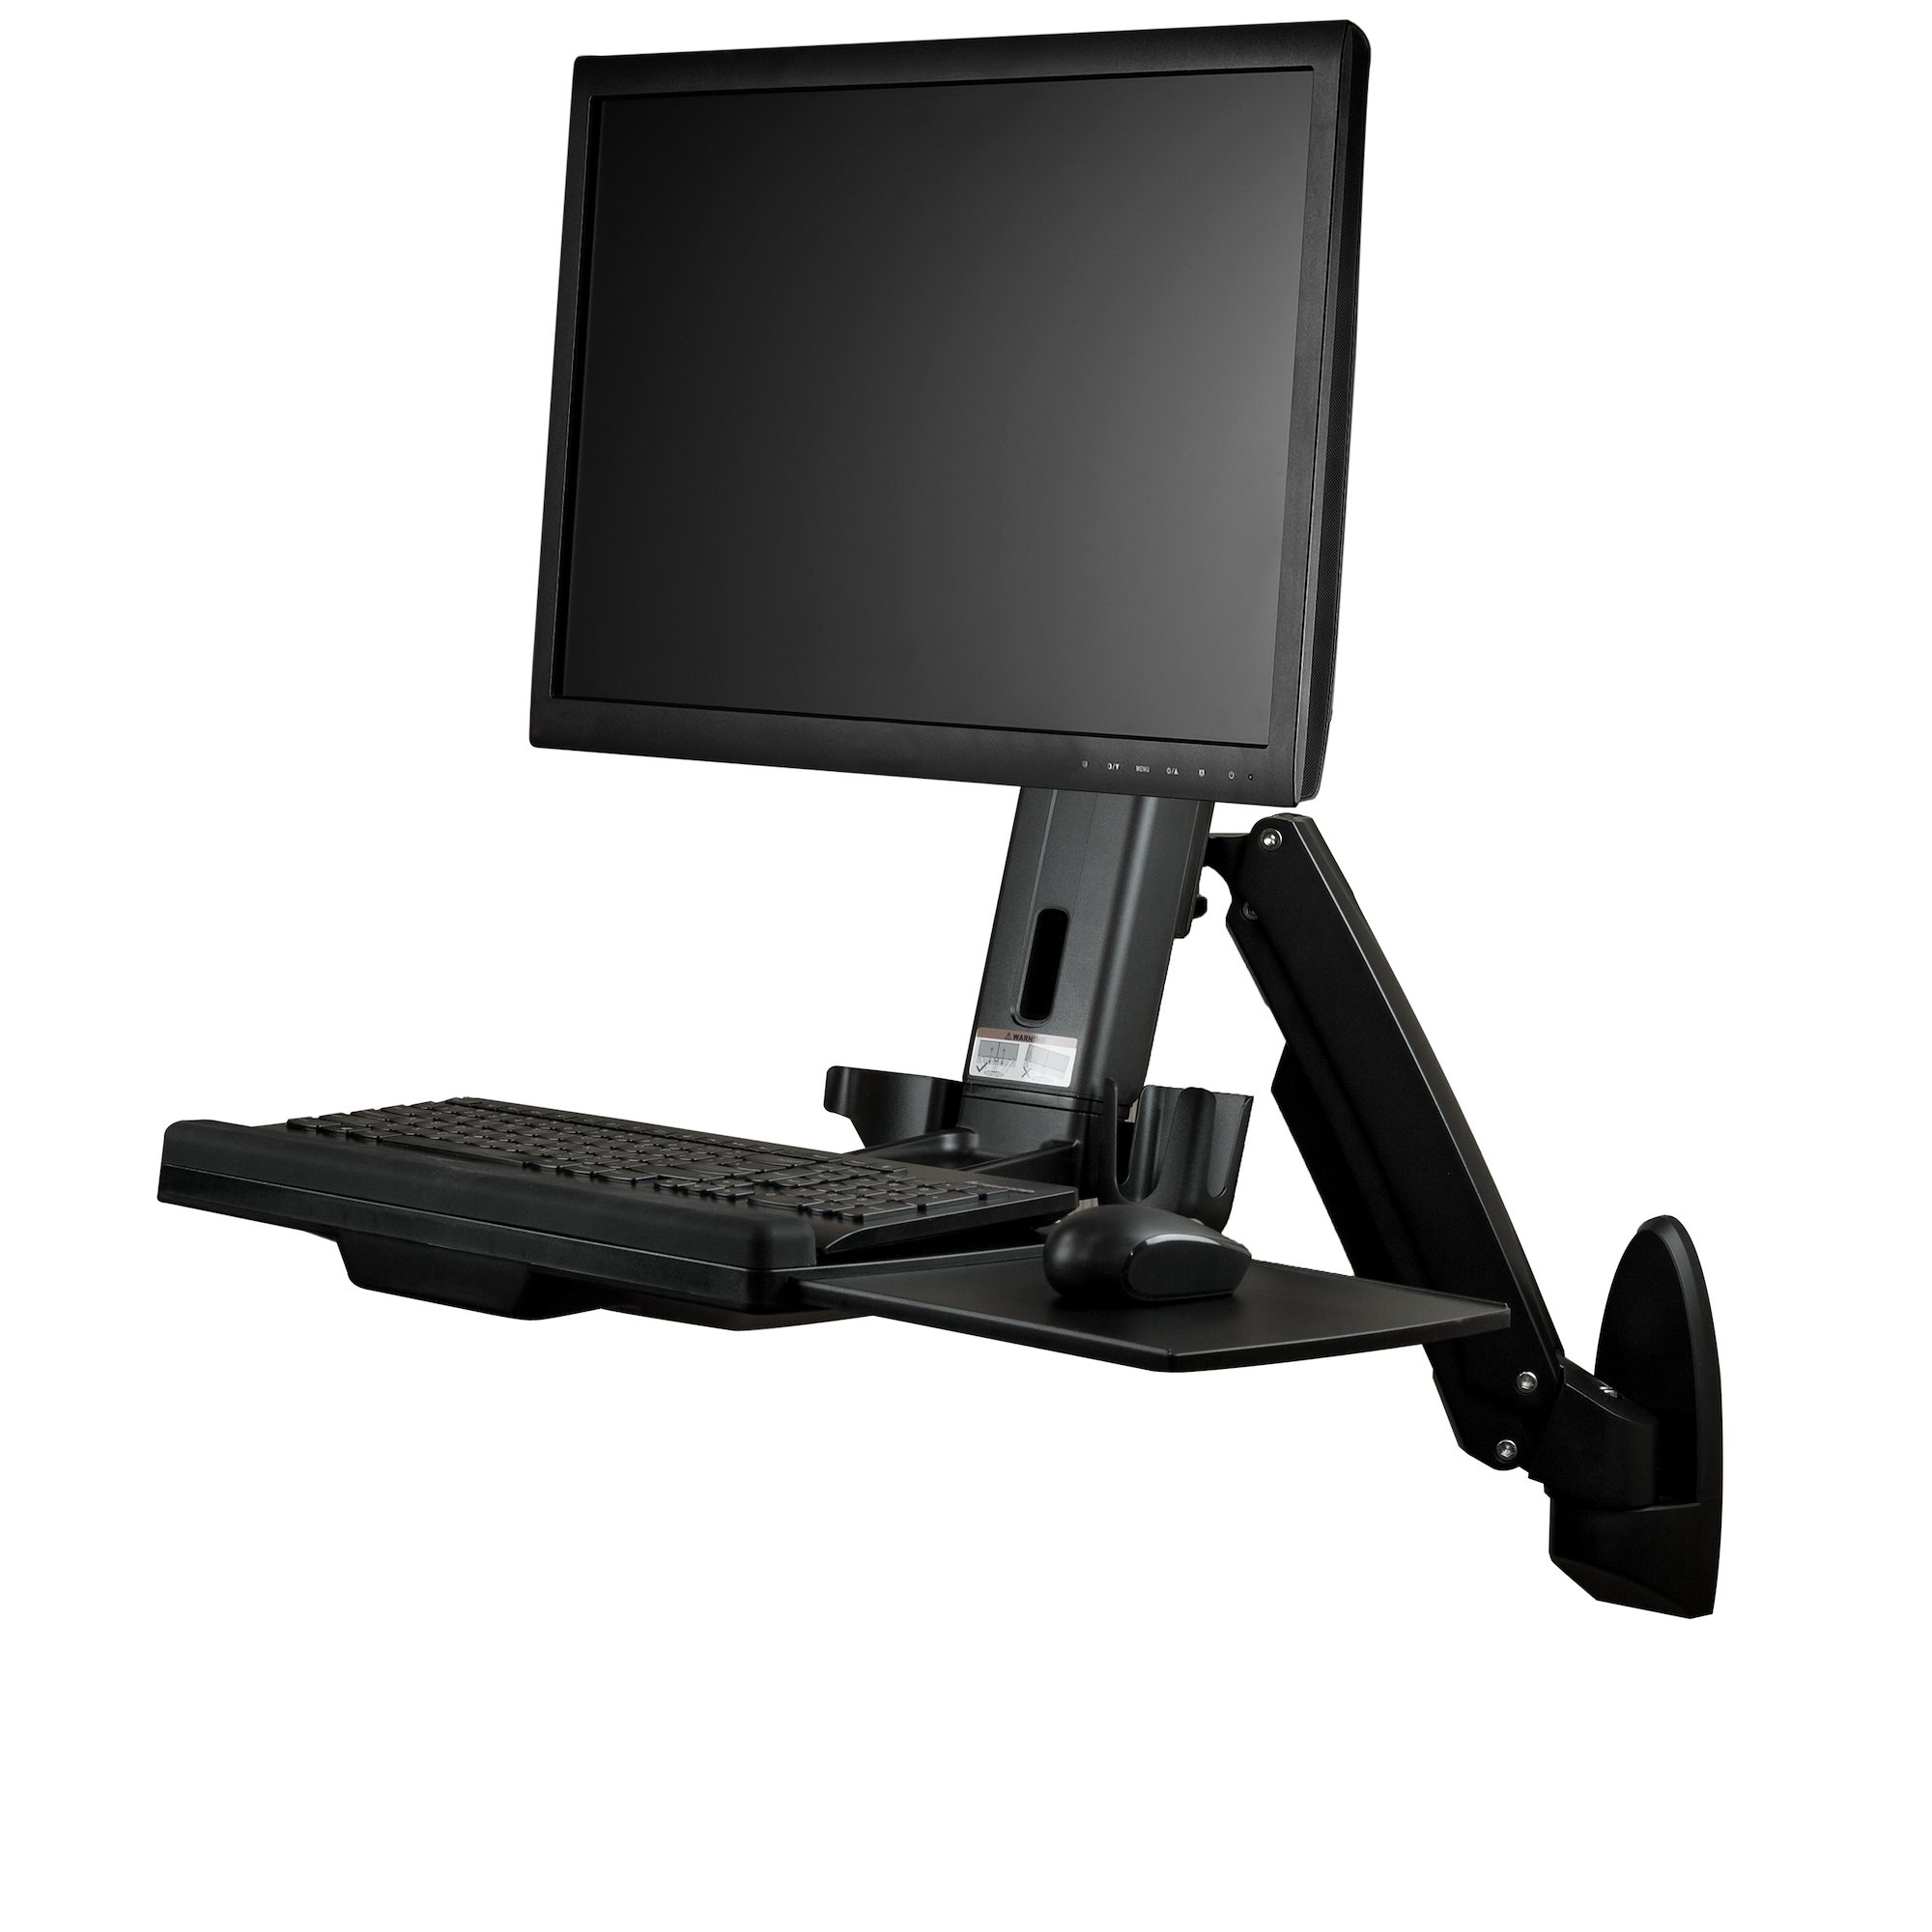 StarTech.com Wall Mount Workstation, Articulating Full Motion Standing Desk With Ergonomic Height Adjustable Monitor & Keyboard Tray Arm, Mouse & Scanner Holders, For Single VESA Display - Fo - C2000